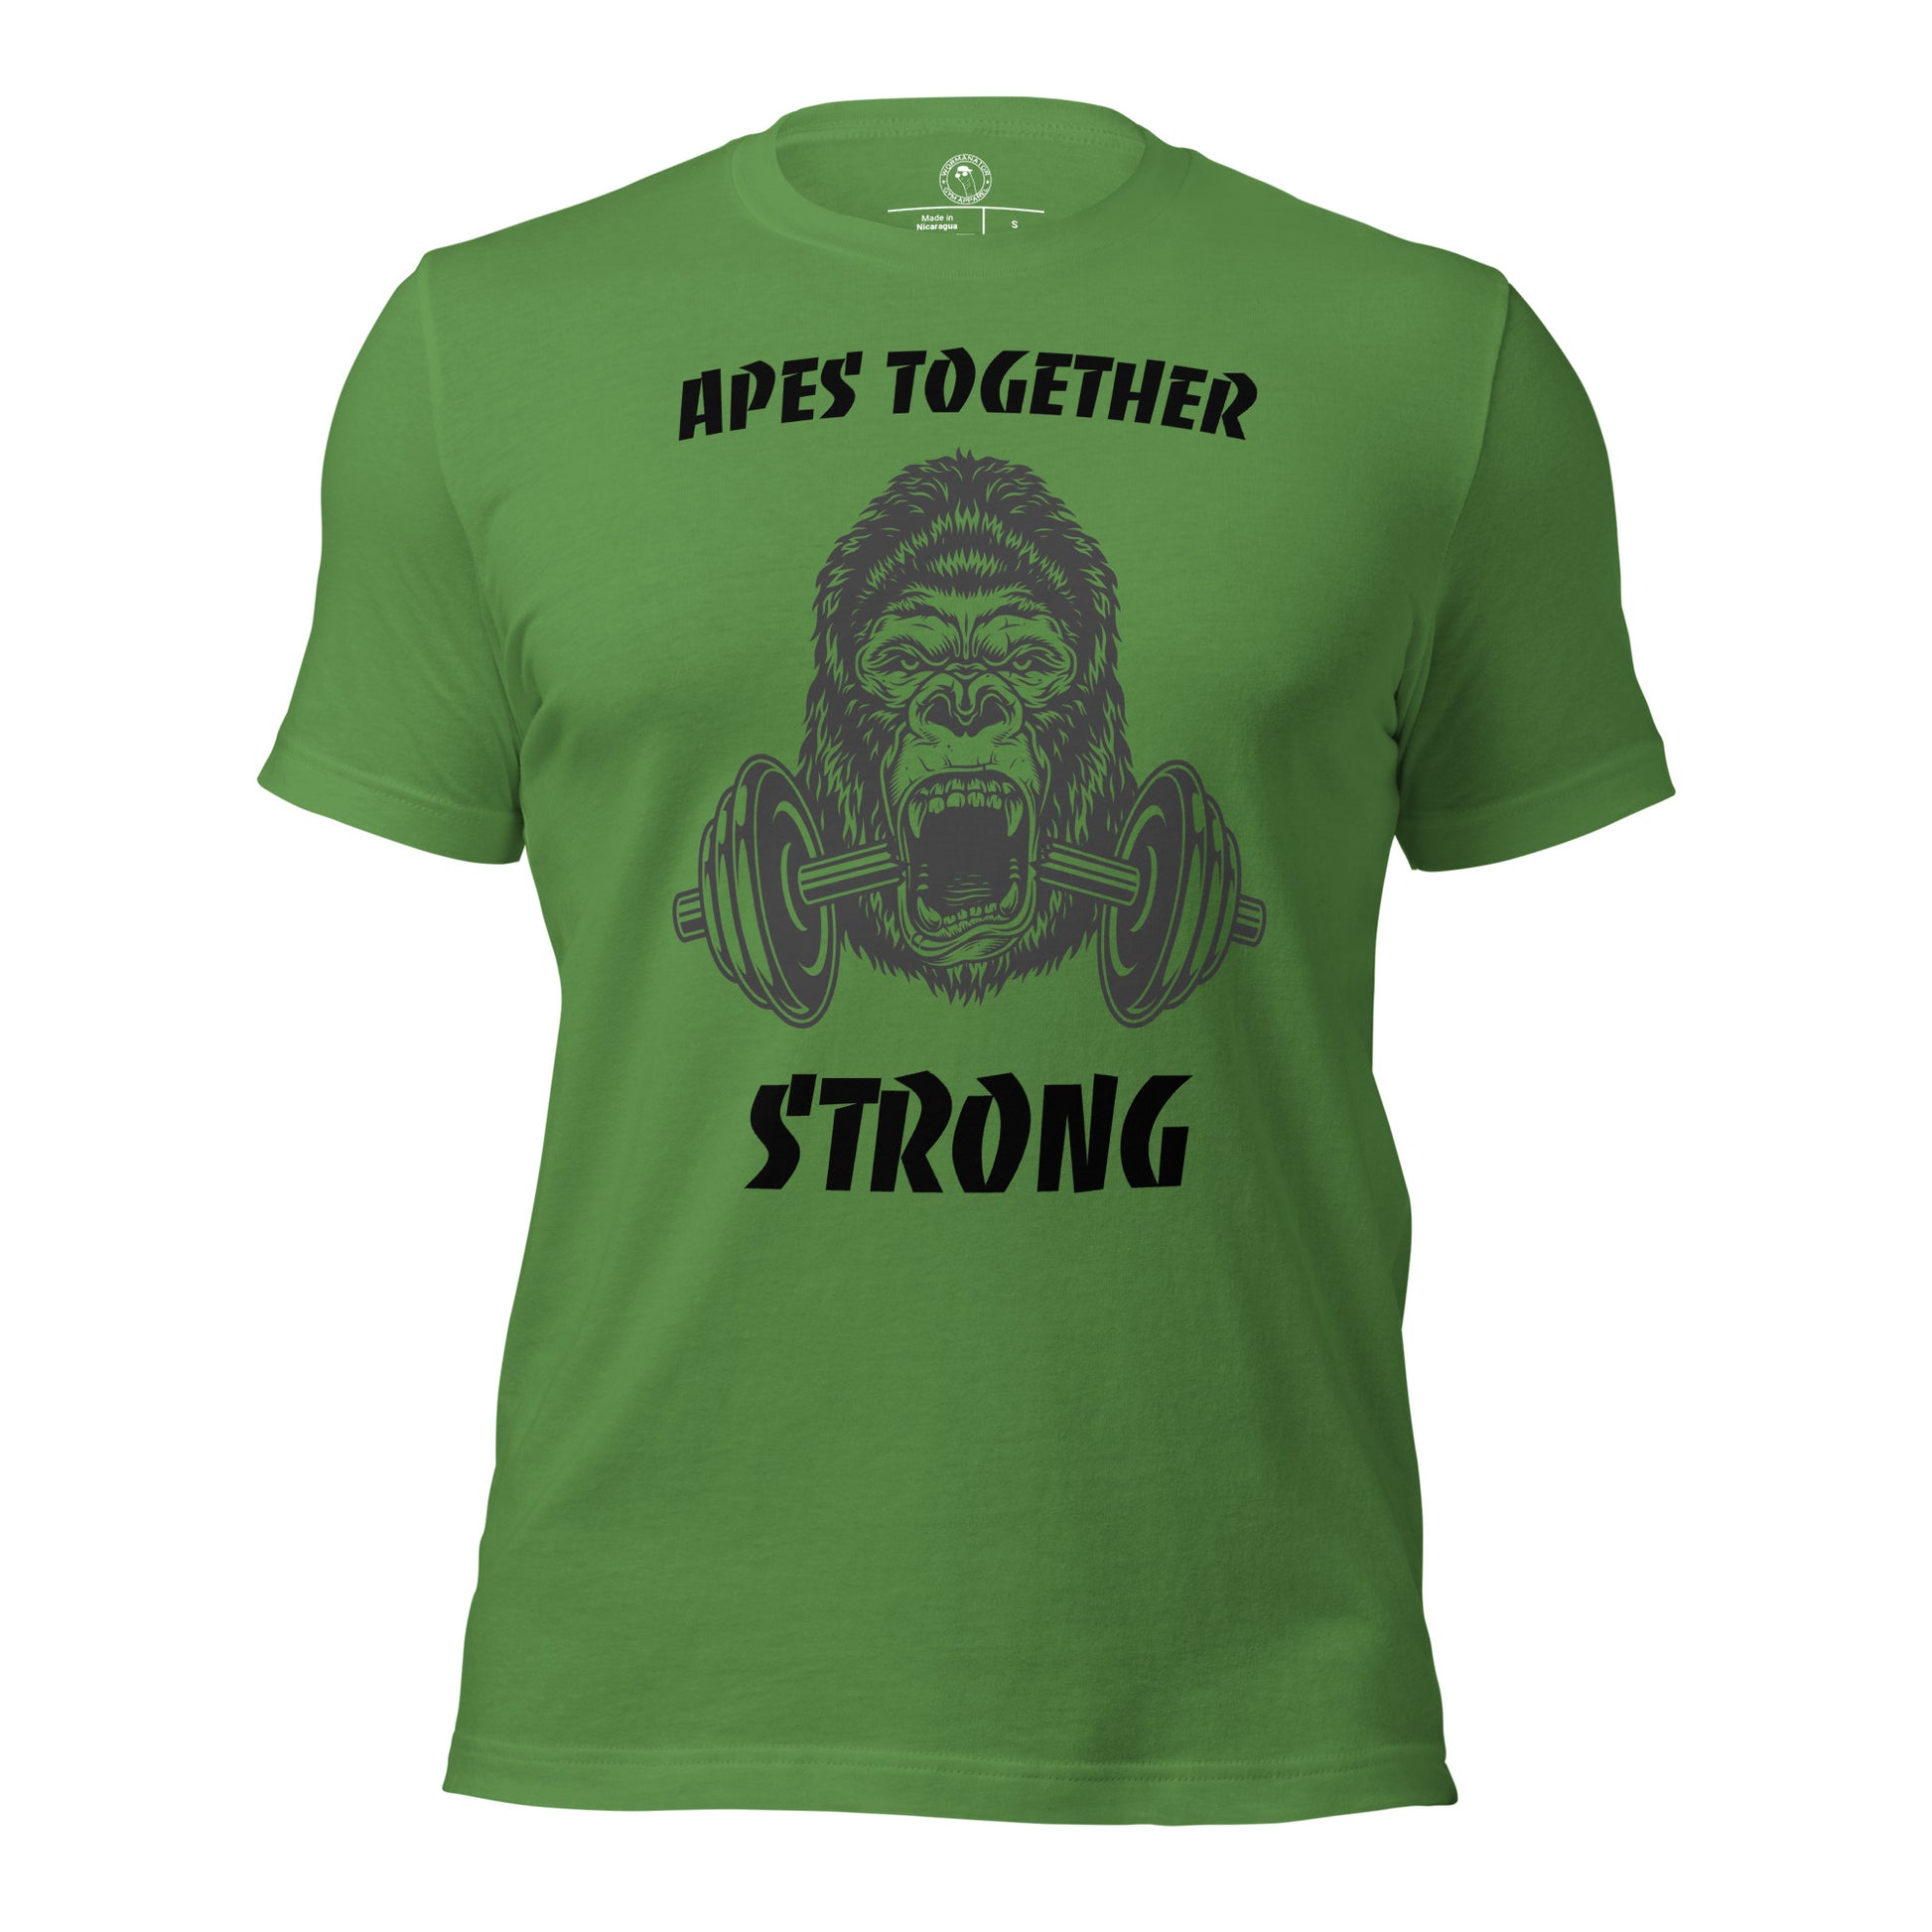 Apes Together Strong Shirt in Leaf Green